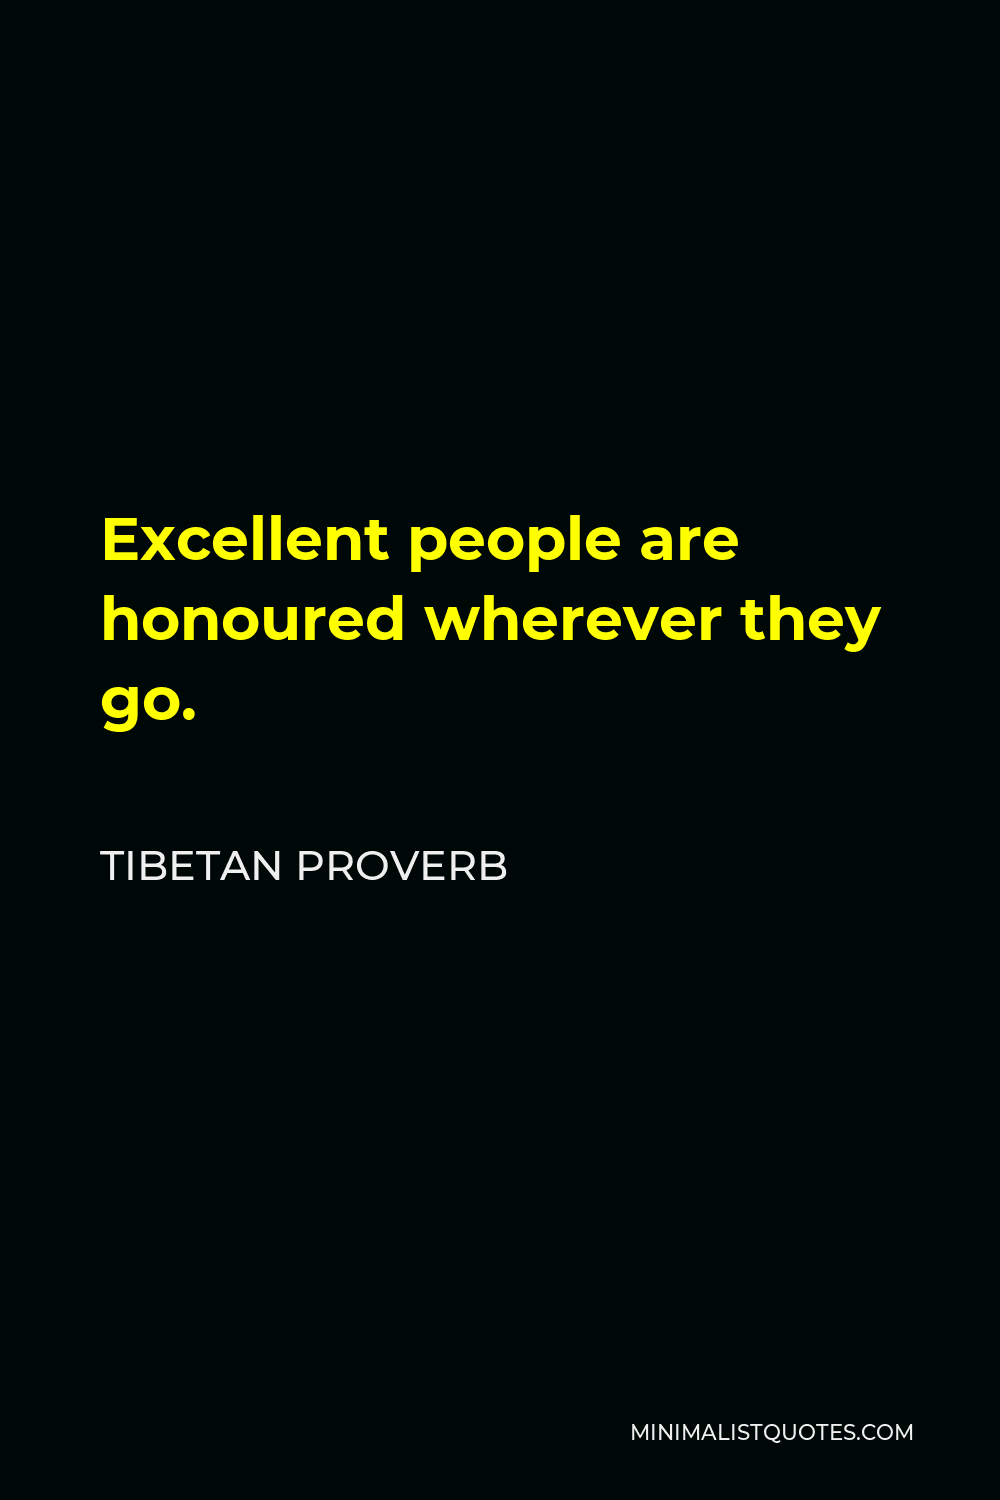 Tibetan Proverb Quote - Excellent people are honoured wherever they go.